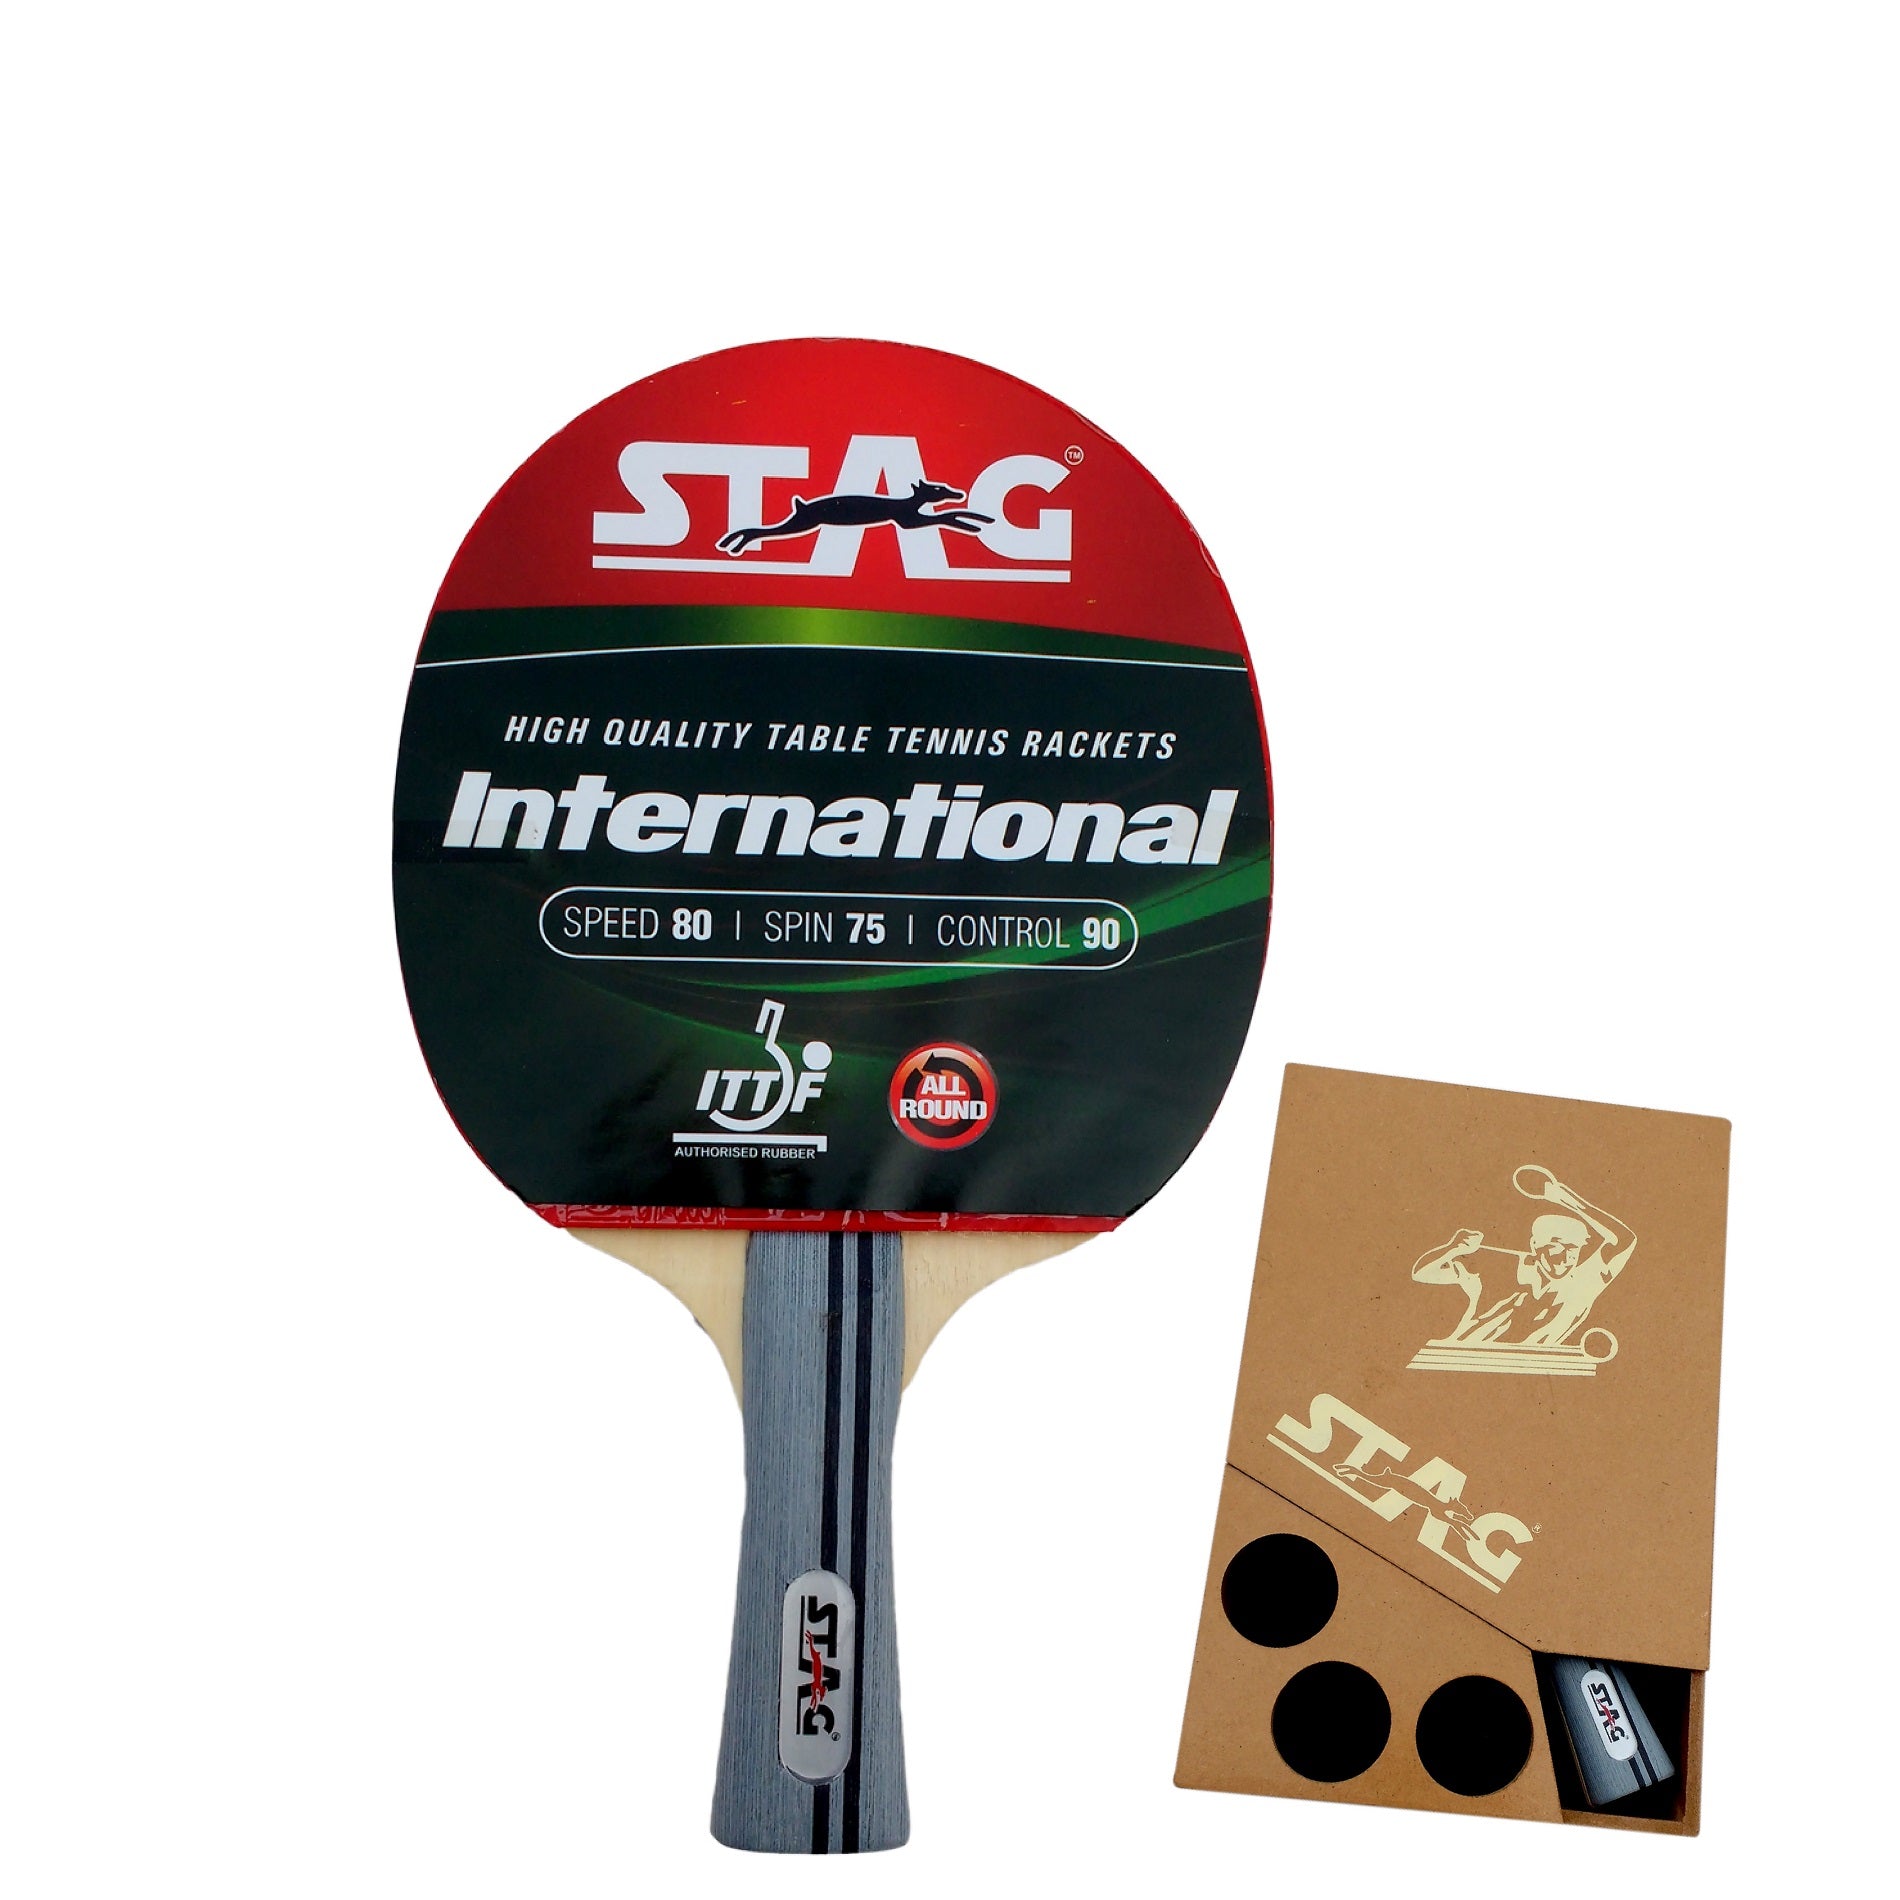 Stag International Table Tennis Racquet with wooden case